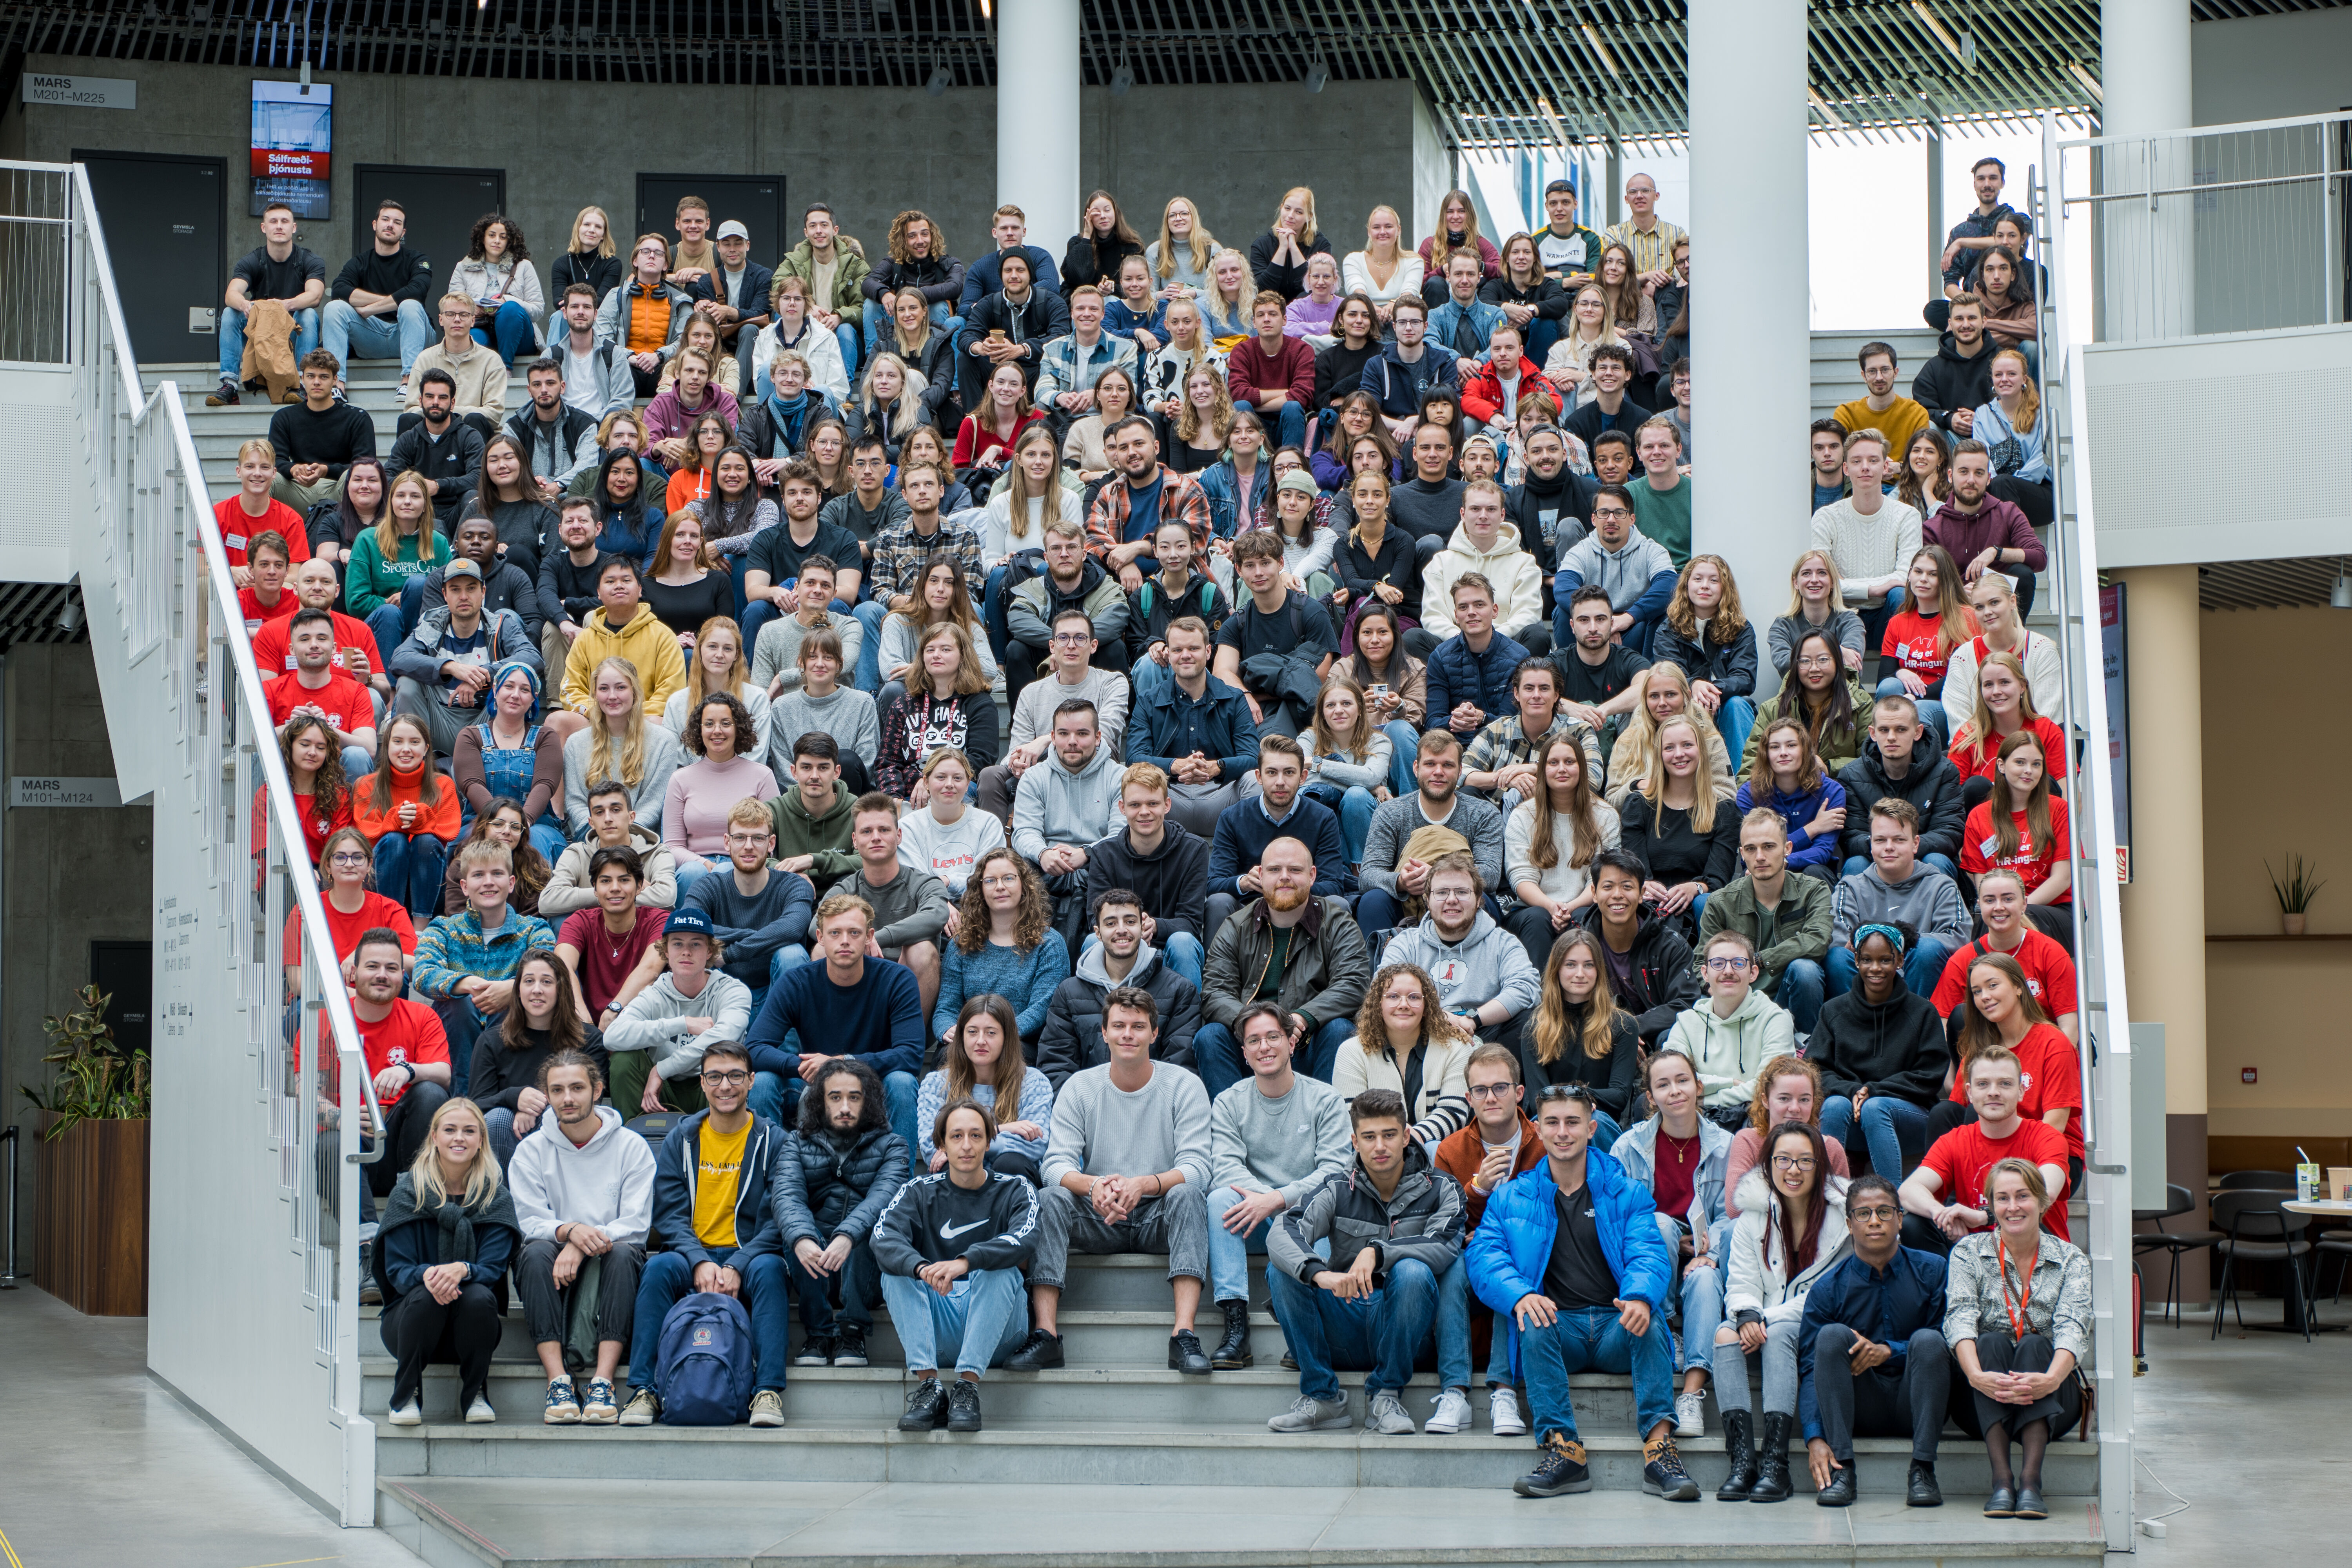 The 172 exchange students this autumn come from 28 countries sitting on the stairs at Reykjavík University